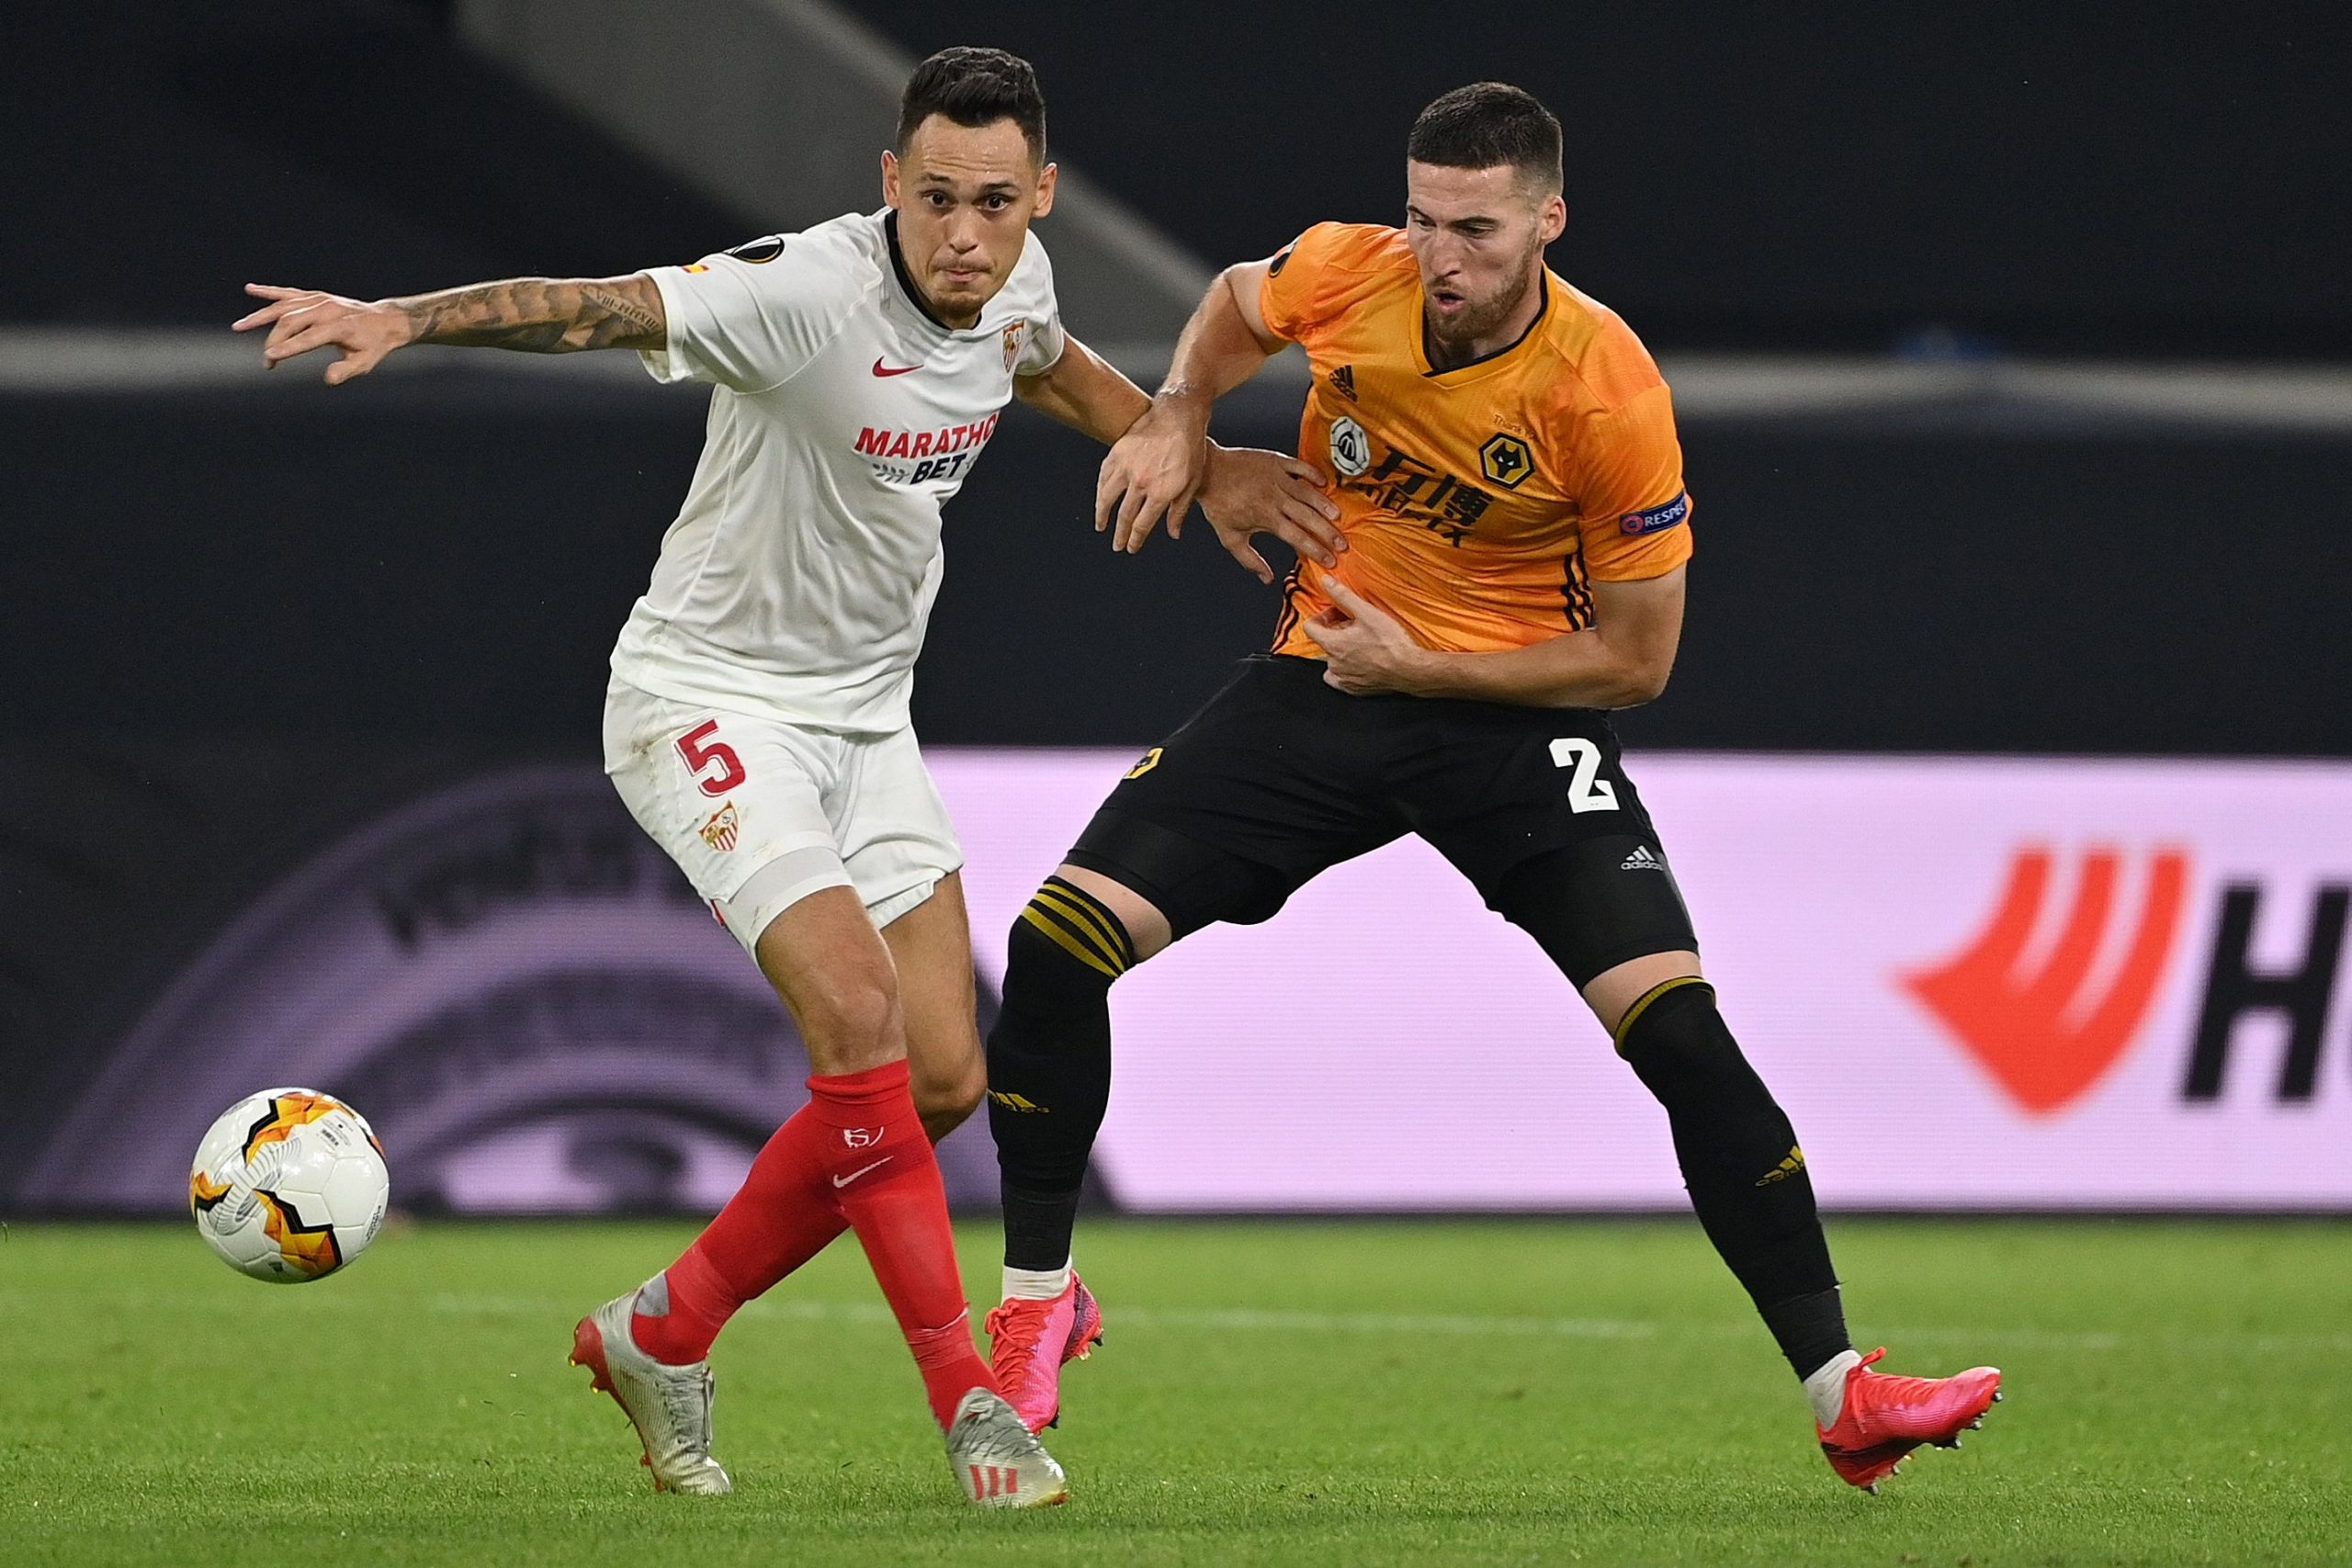 Lucas ocampos (L) scored the winner against Wolves in the Euorpa League (Getty Images)